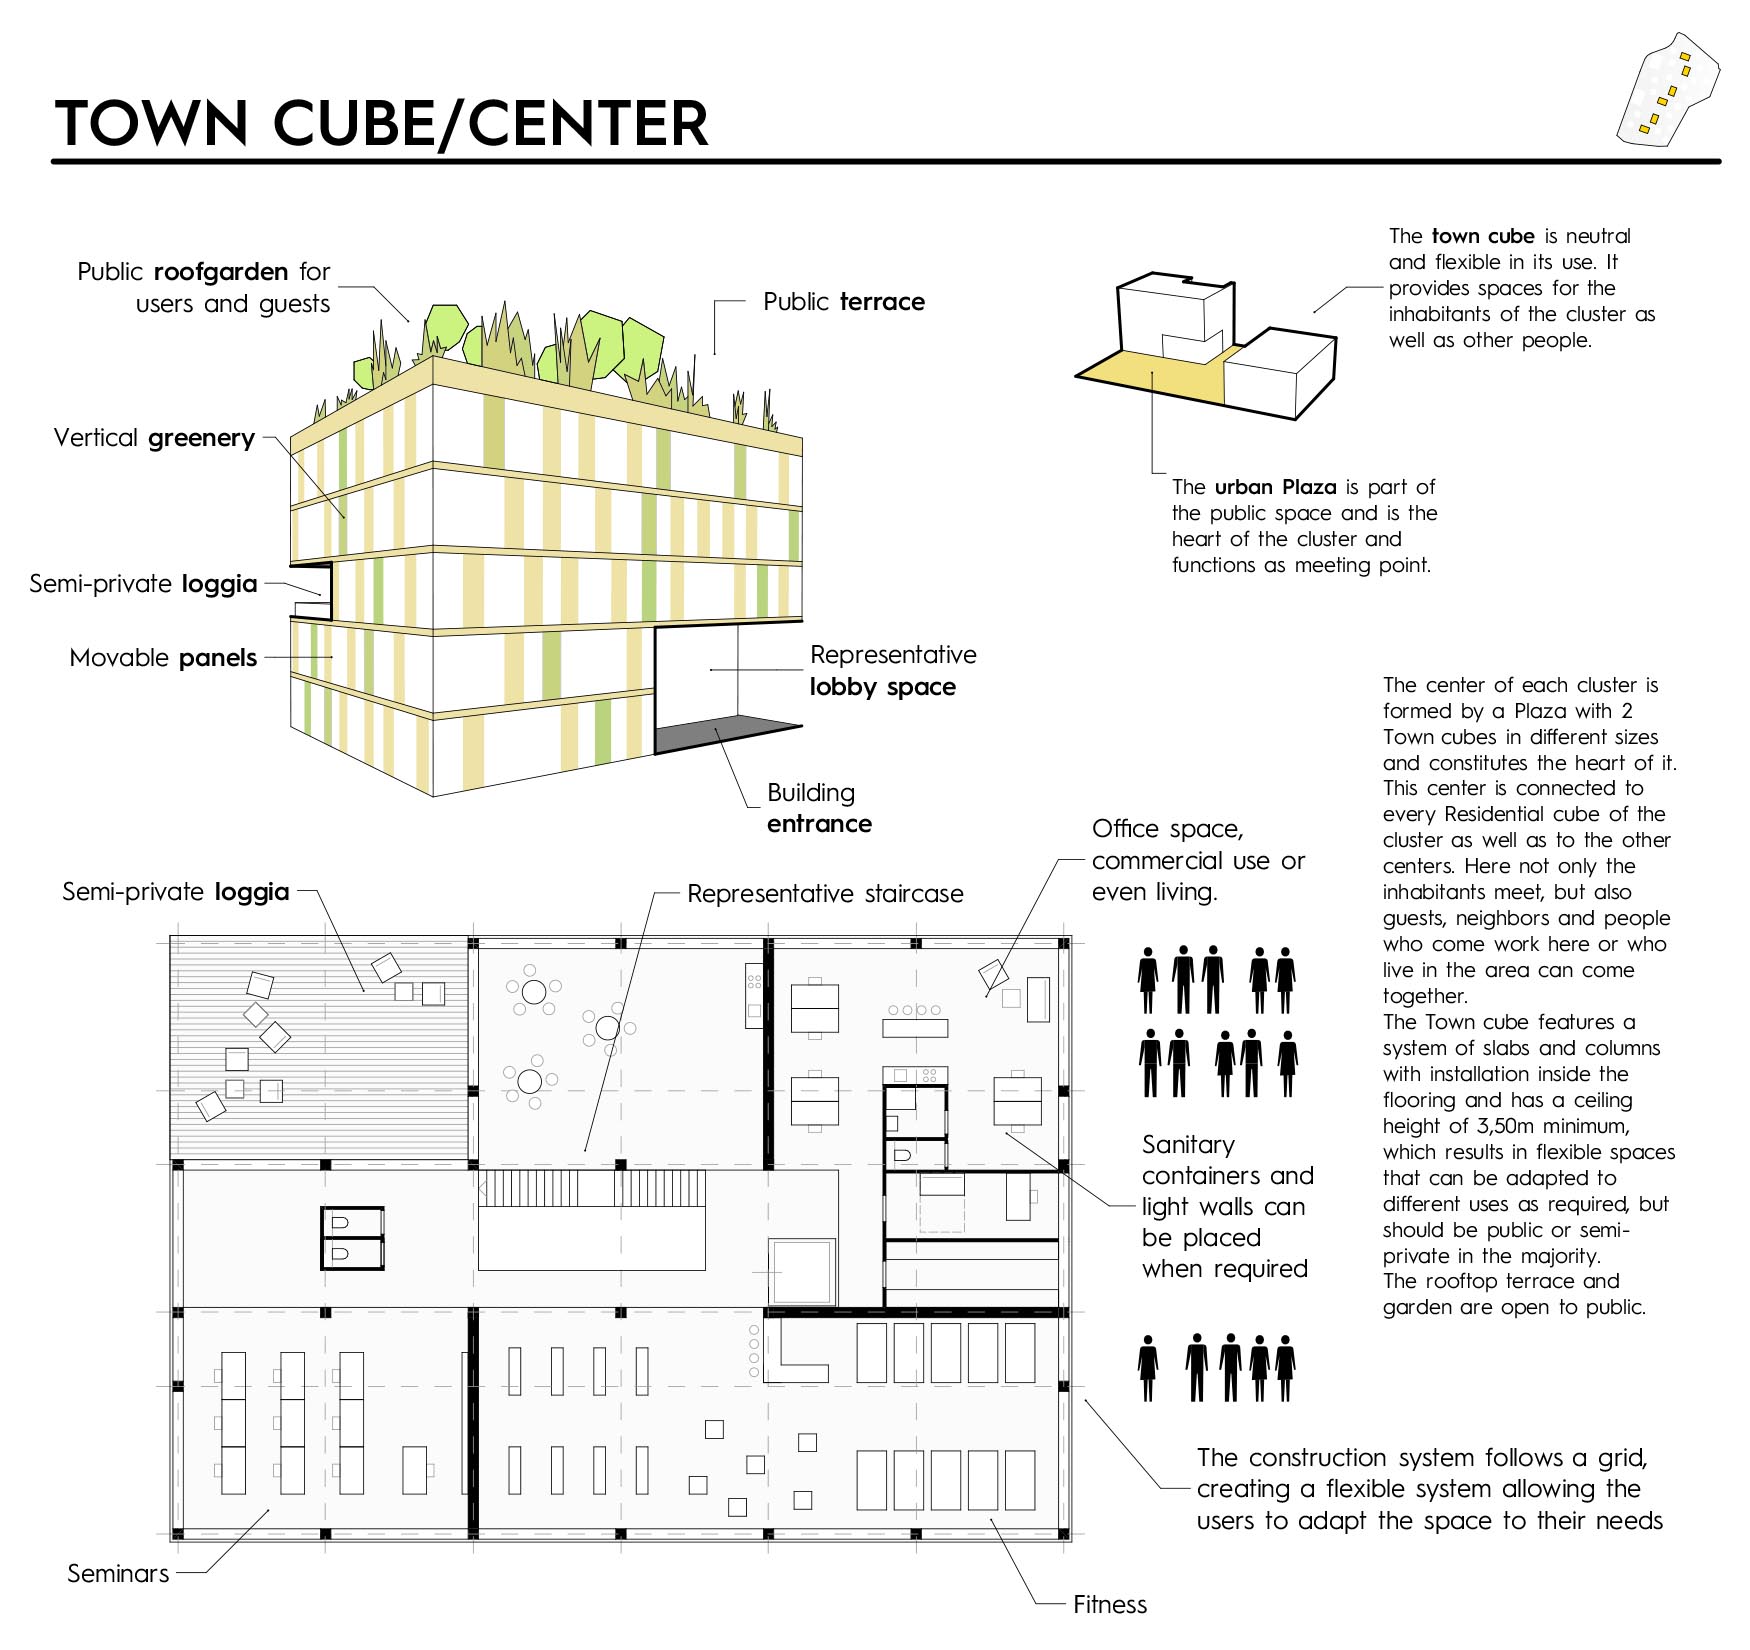 cy architecture_Wettbewerb Europan 13_town cube center